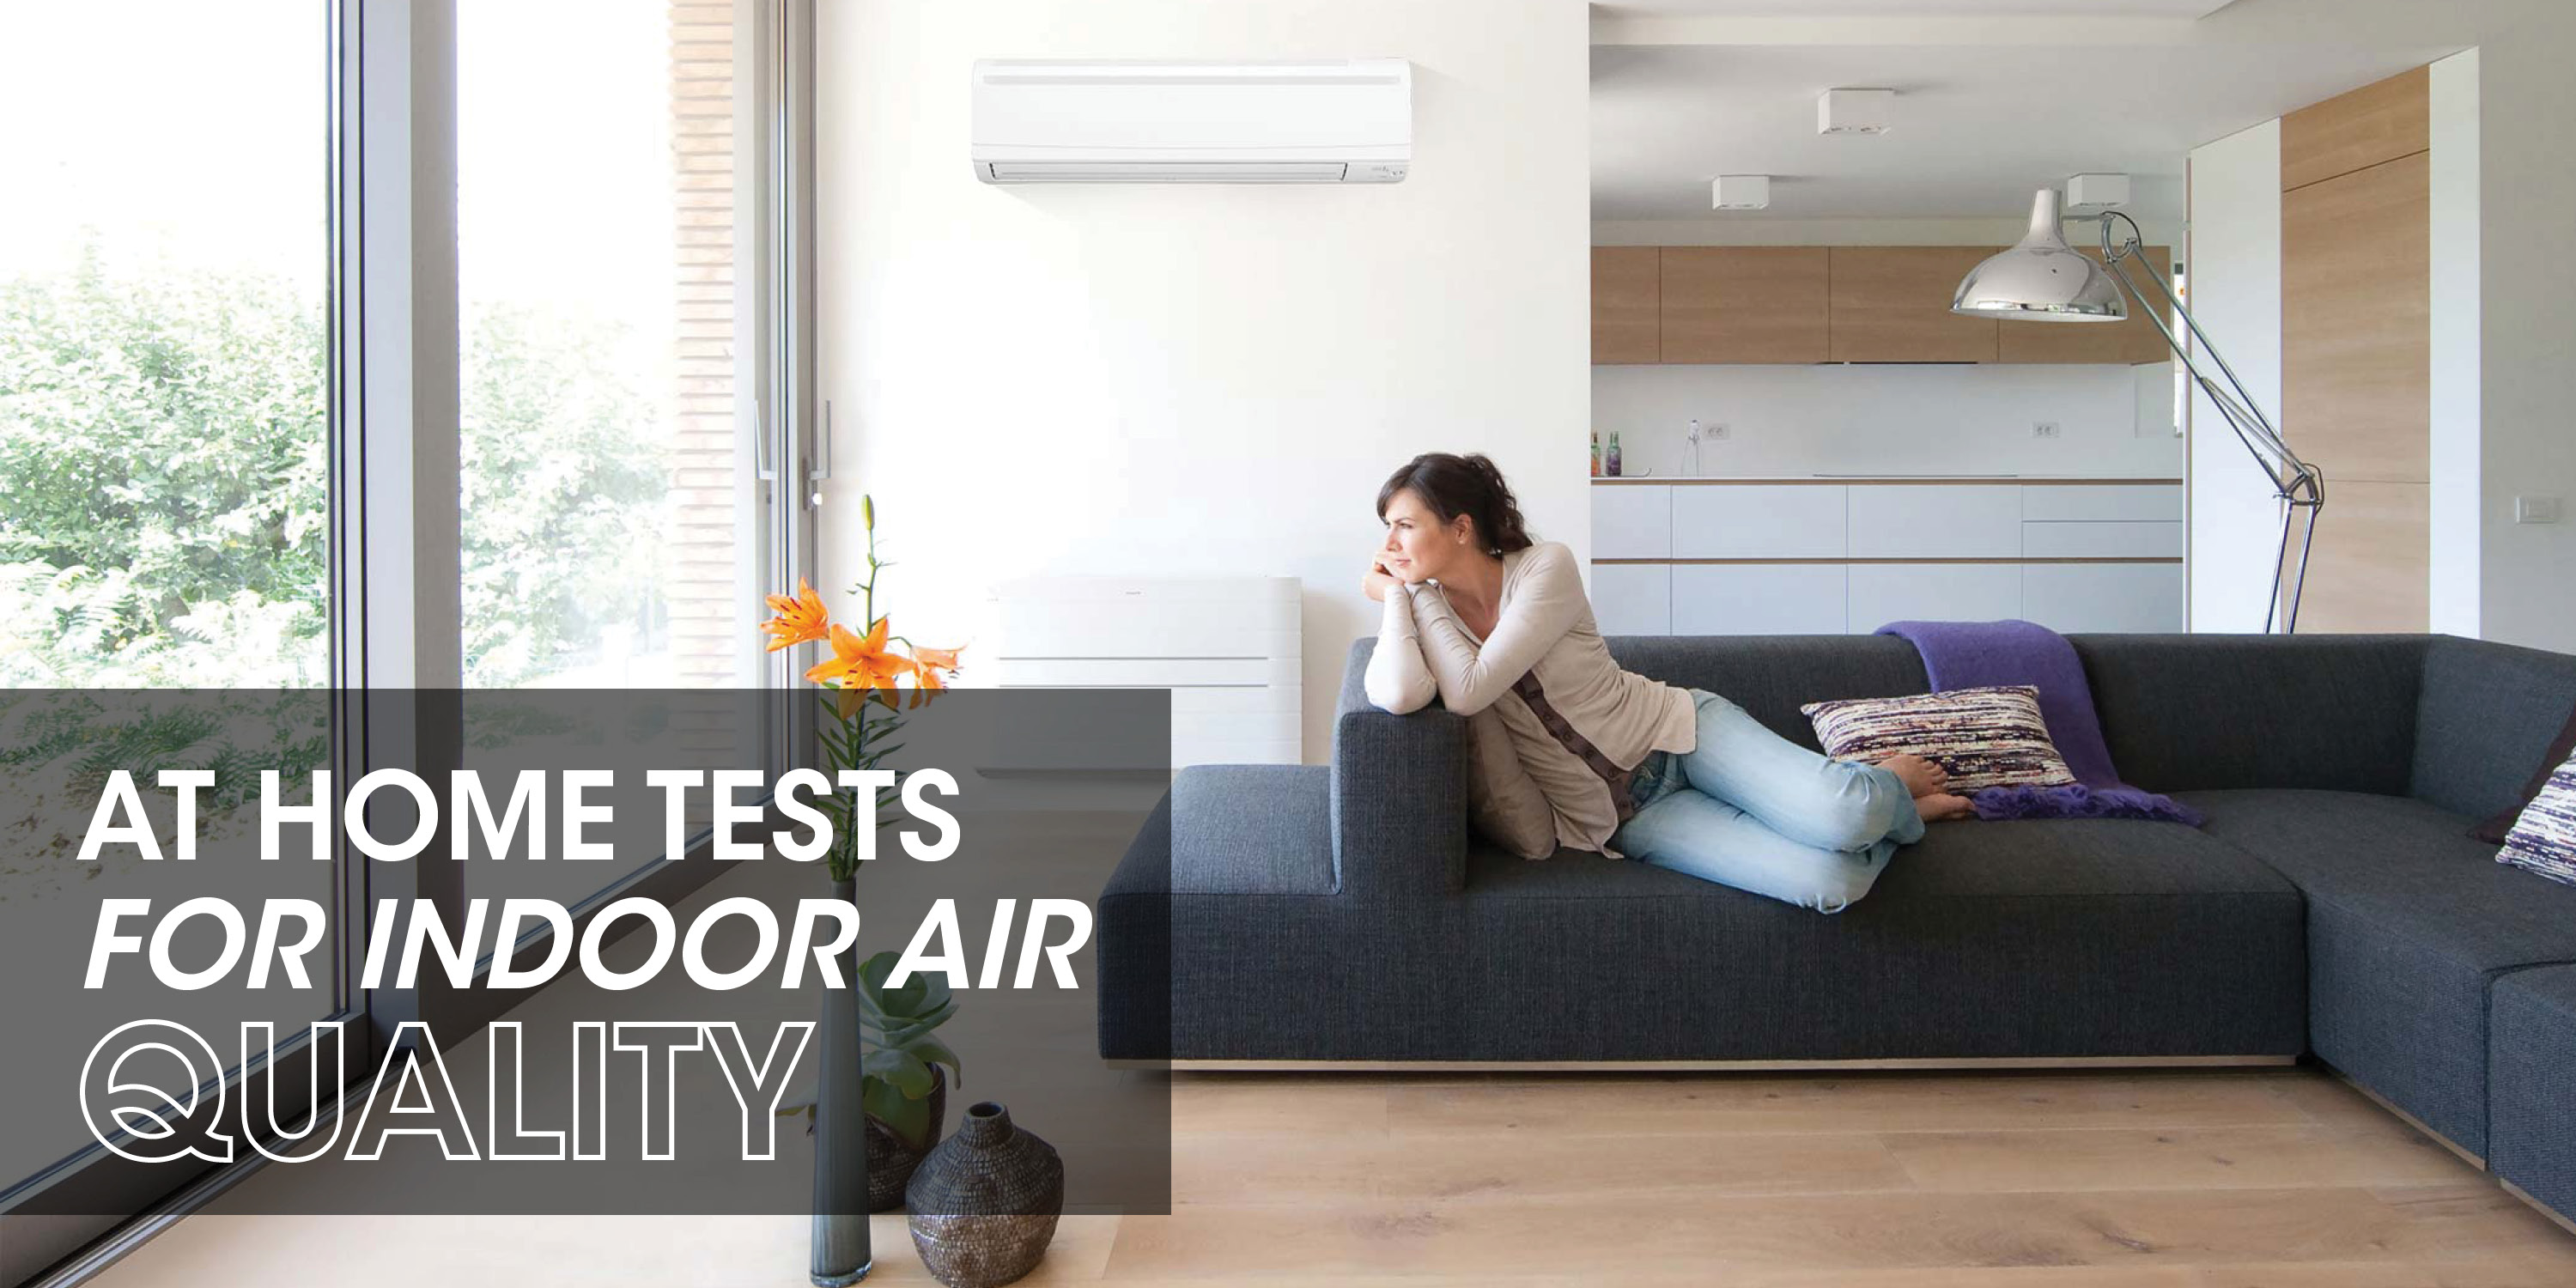 Woman on couch gazing out window with text: "At home tests for indoor air quality"